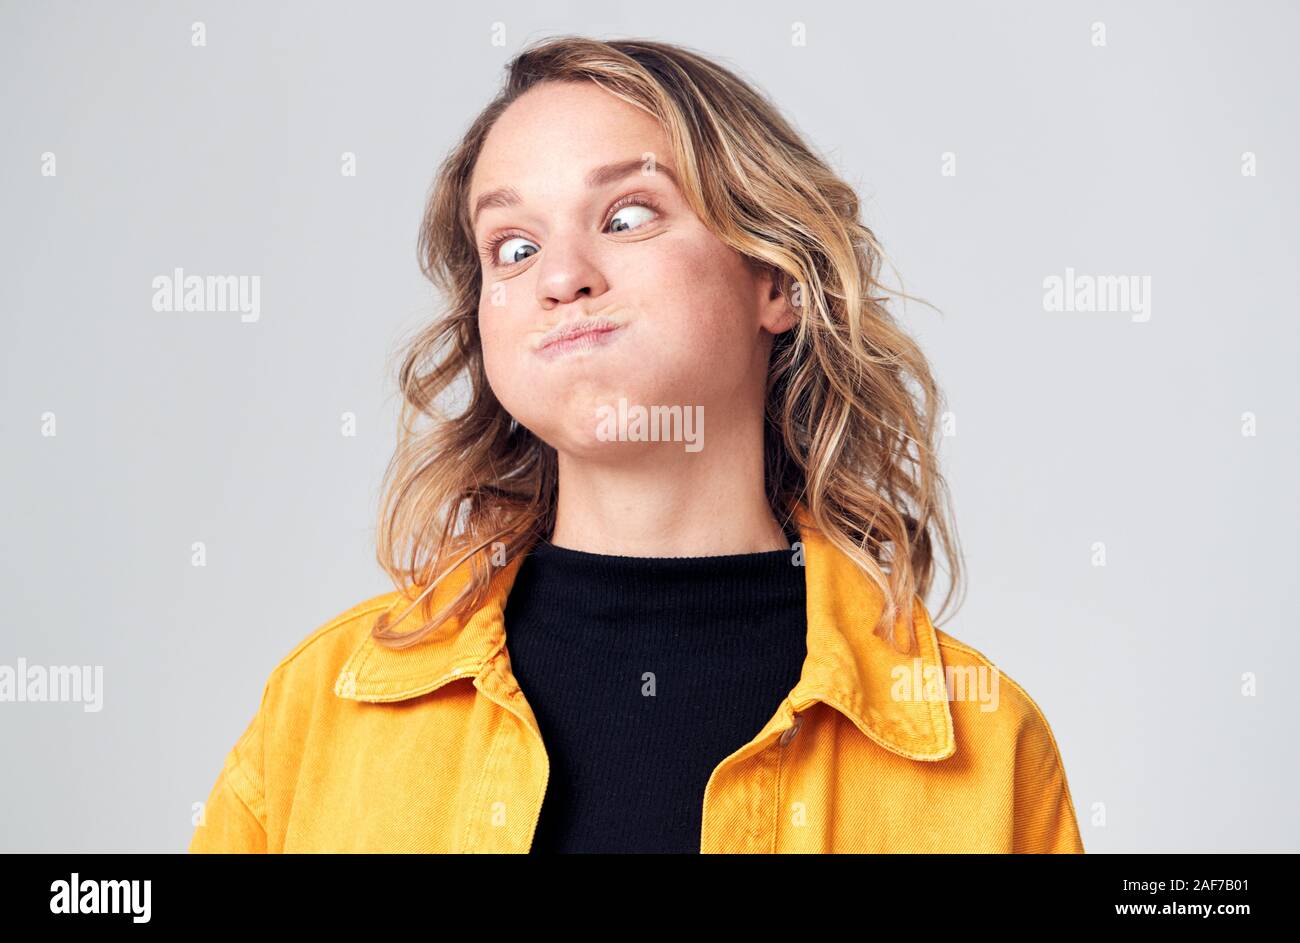 Head And Shoulders Studio Shot Of Woman Pulling Faces And Smiling At Camera Stock Photo